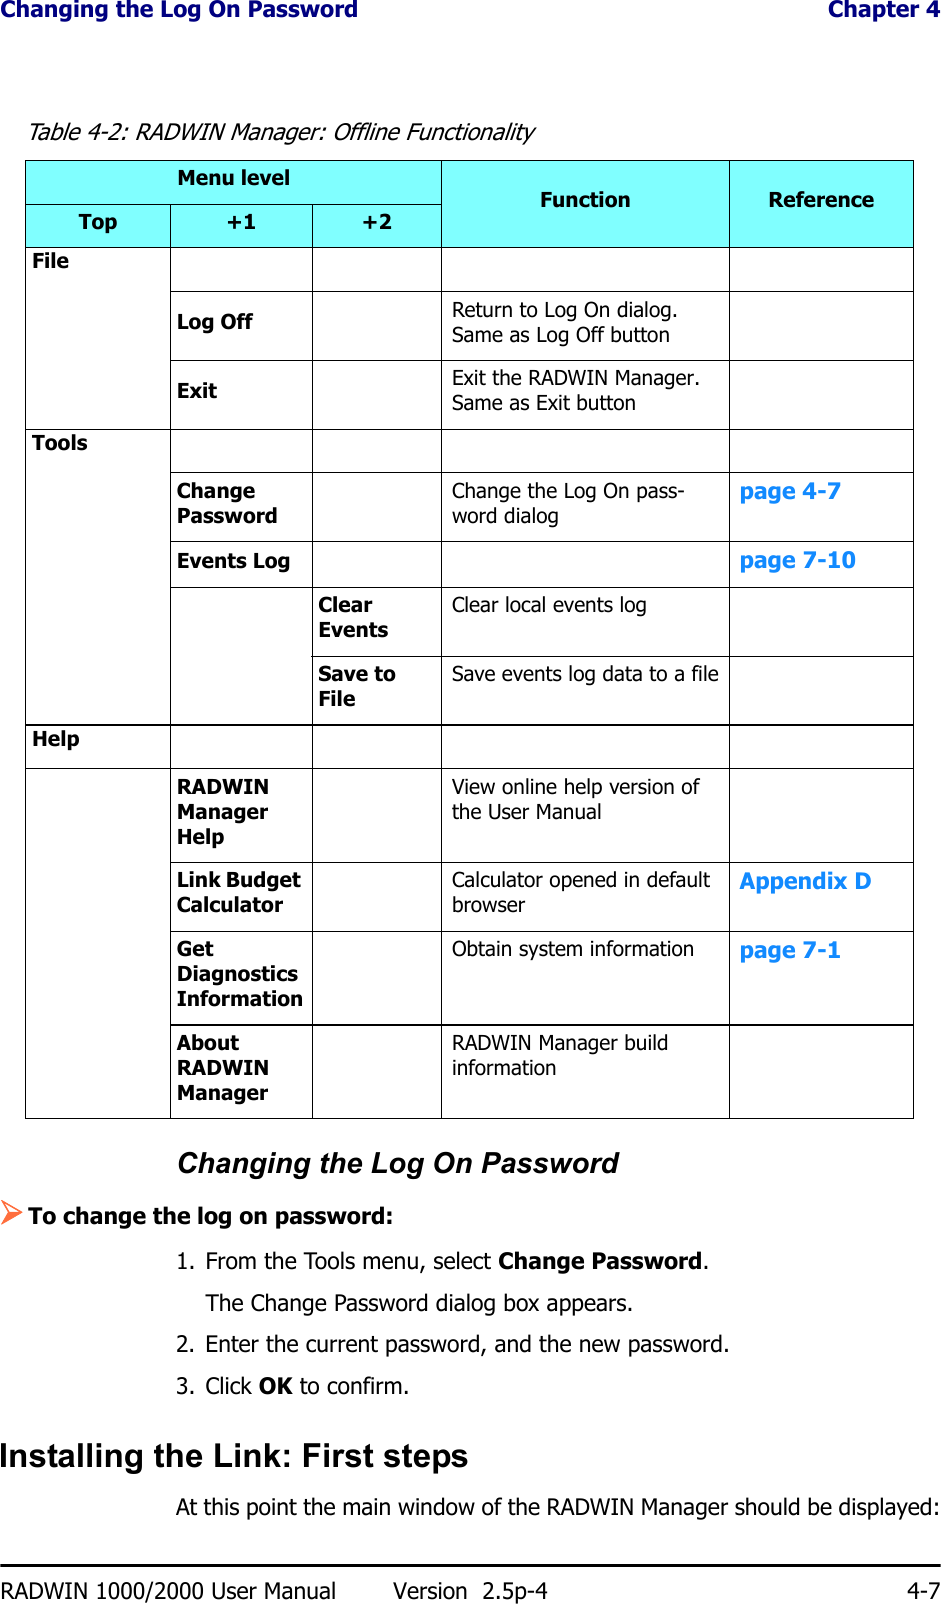 Changing the Log On Password  Chapter 4RADWIN 1000/2000 User Manual Version  2.5p-4 4-7Changing the Log On Password¾To change the log on password:1. From the Tools menu, select Change Password.The Change Password dialog box appears.2. Enter the current password, and the new password.3. Click OK to confirm.Installing the Link: First stepsAt this point the main window of the RADWIN Manager should be displayed:Table 4-2: RADWIN Manager: Offline FunctionalityMenu levelFunction ReferenceTop +1 +2FileLog Off Return to Log On dialog. Same as Log Off buttonExit Exit the RADWIN Manager. Same as Exit buttonToolsChange PasswordChange the Log On pass-word dialog page 4-7Events Log page 7-10Clear EventsClear local events logSave to FileSave events log data to a fileHelpRADWIN Manager HelpView online help version of the User ManualLink Budget CalculatorCalculator opened in default browser Appendix DGet Diagnostics InformationObtain system information page 7-1About RADWIN ManagerRADWIN Manager build information